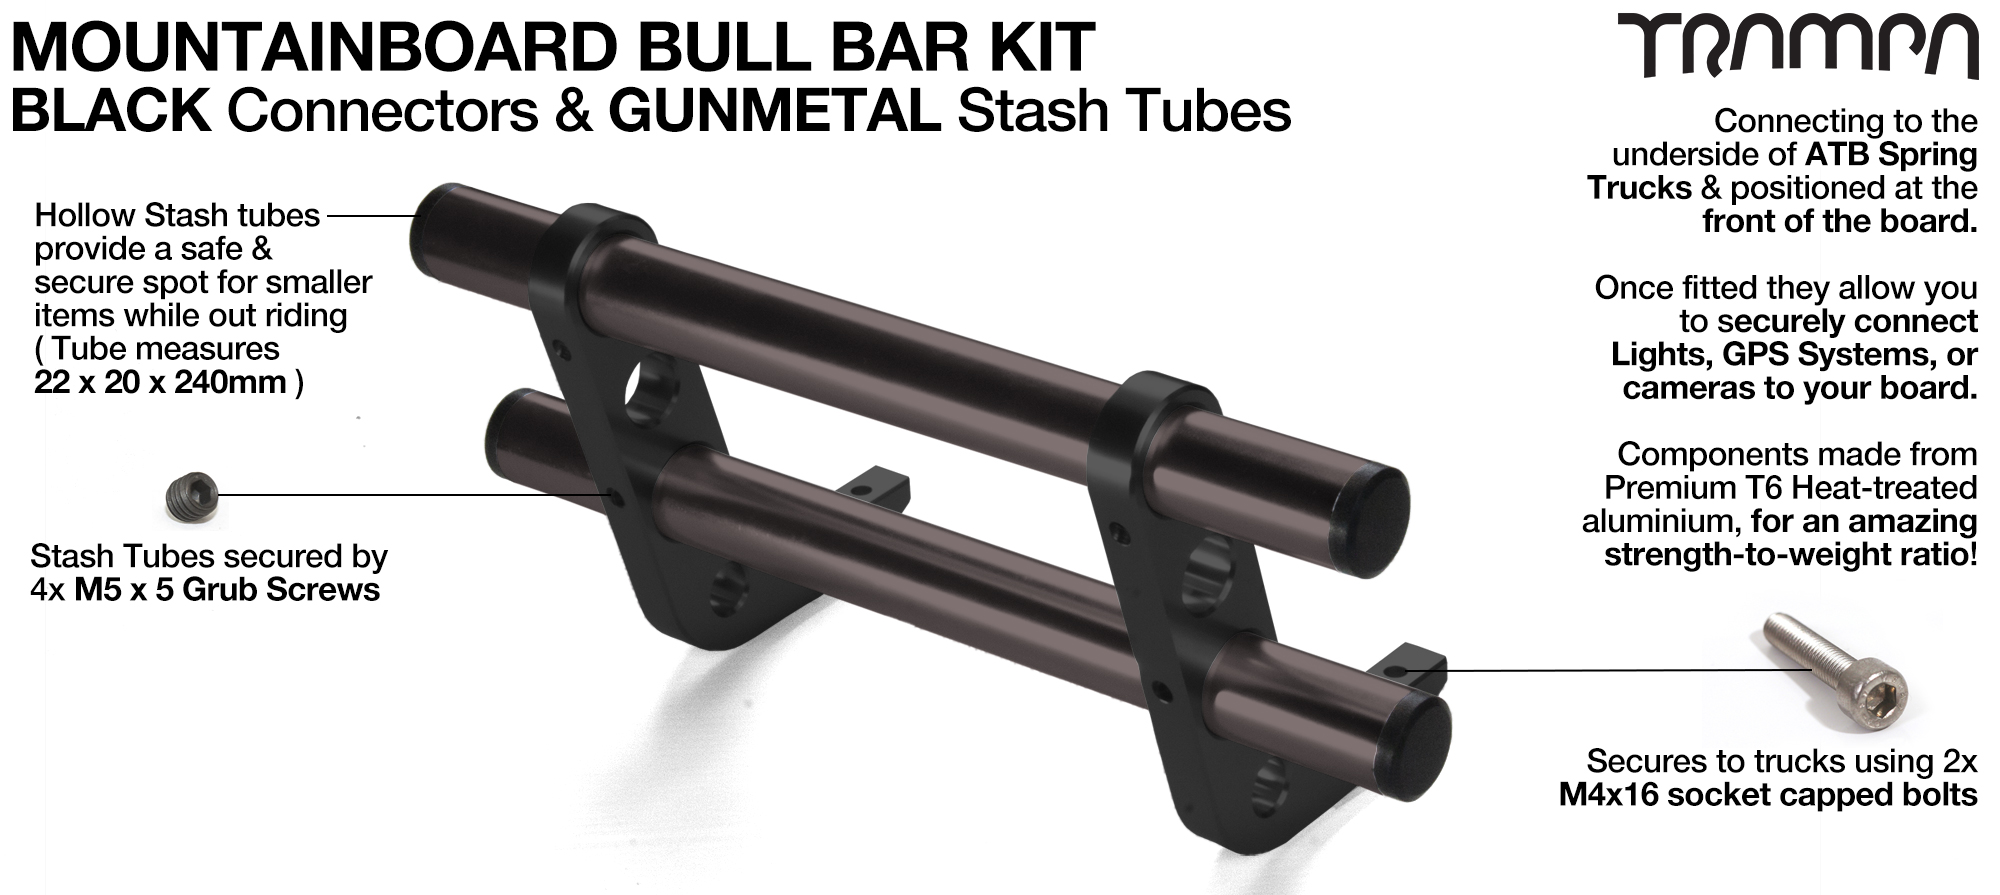 BLACK Uprights & GUNMETAL Crossbar BULL BARS for MOUNTAINBOARDS using T6 Heat Treated CNC'd AluminIum Clamps, Hollow Aluminium Stash Tubes with Rubber end bungs  